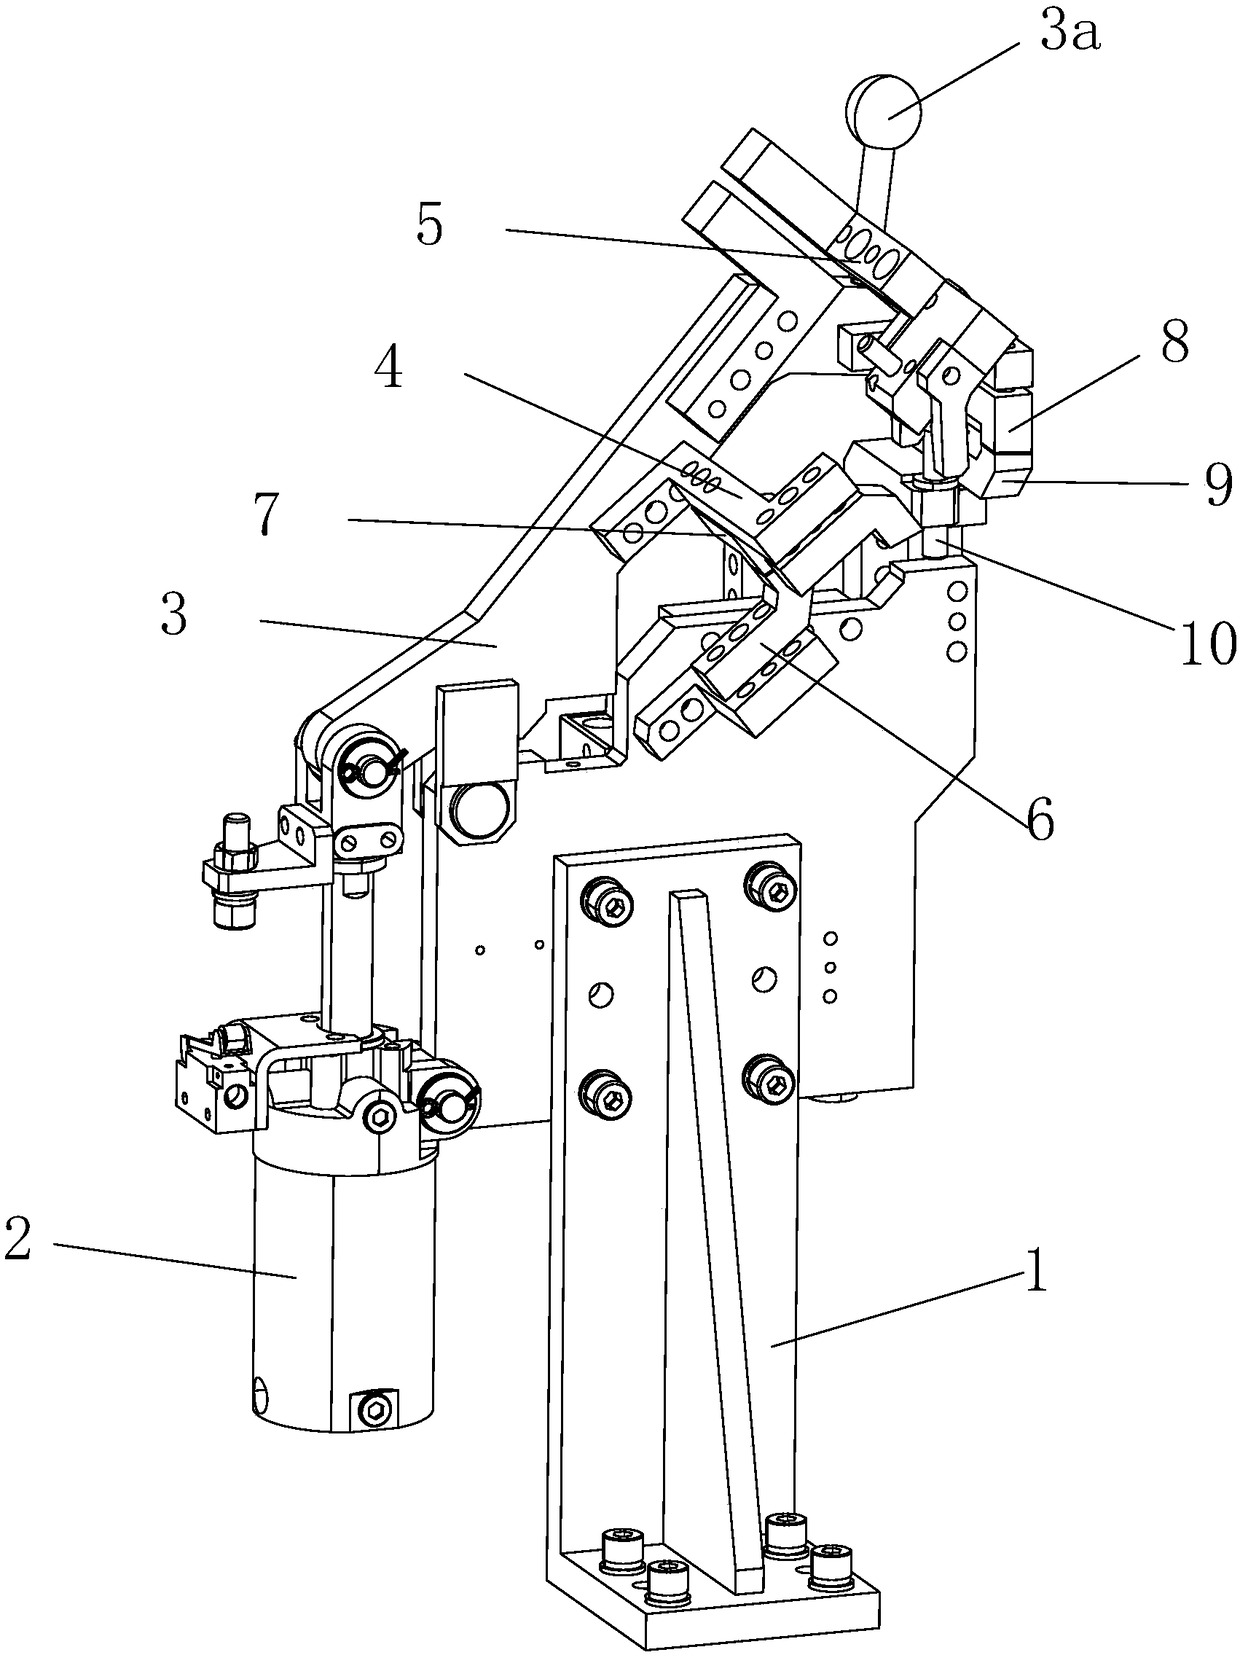 Left portion positioning and clamping tool for automobile left and right side inner plate front assembly